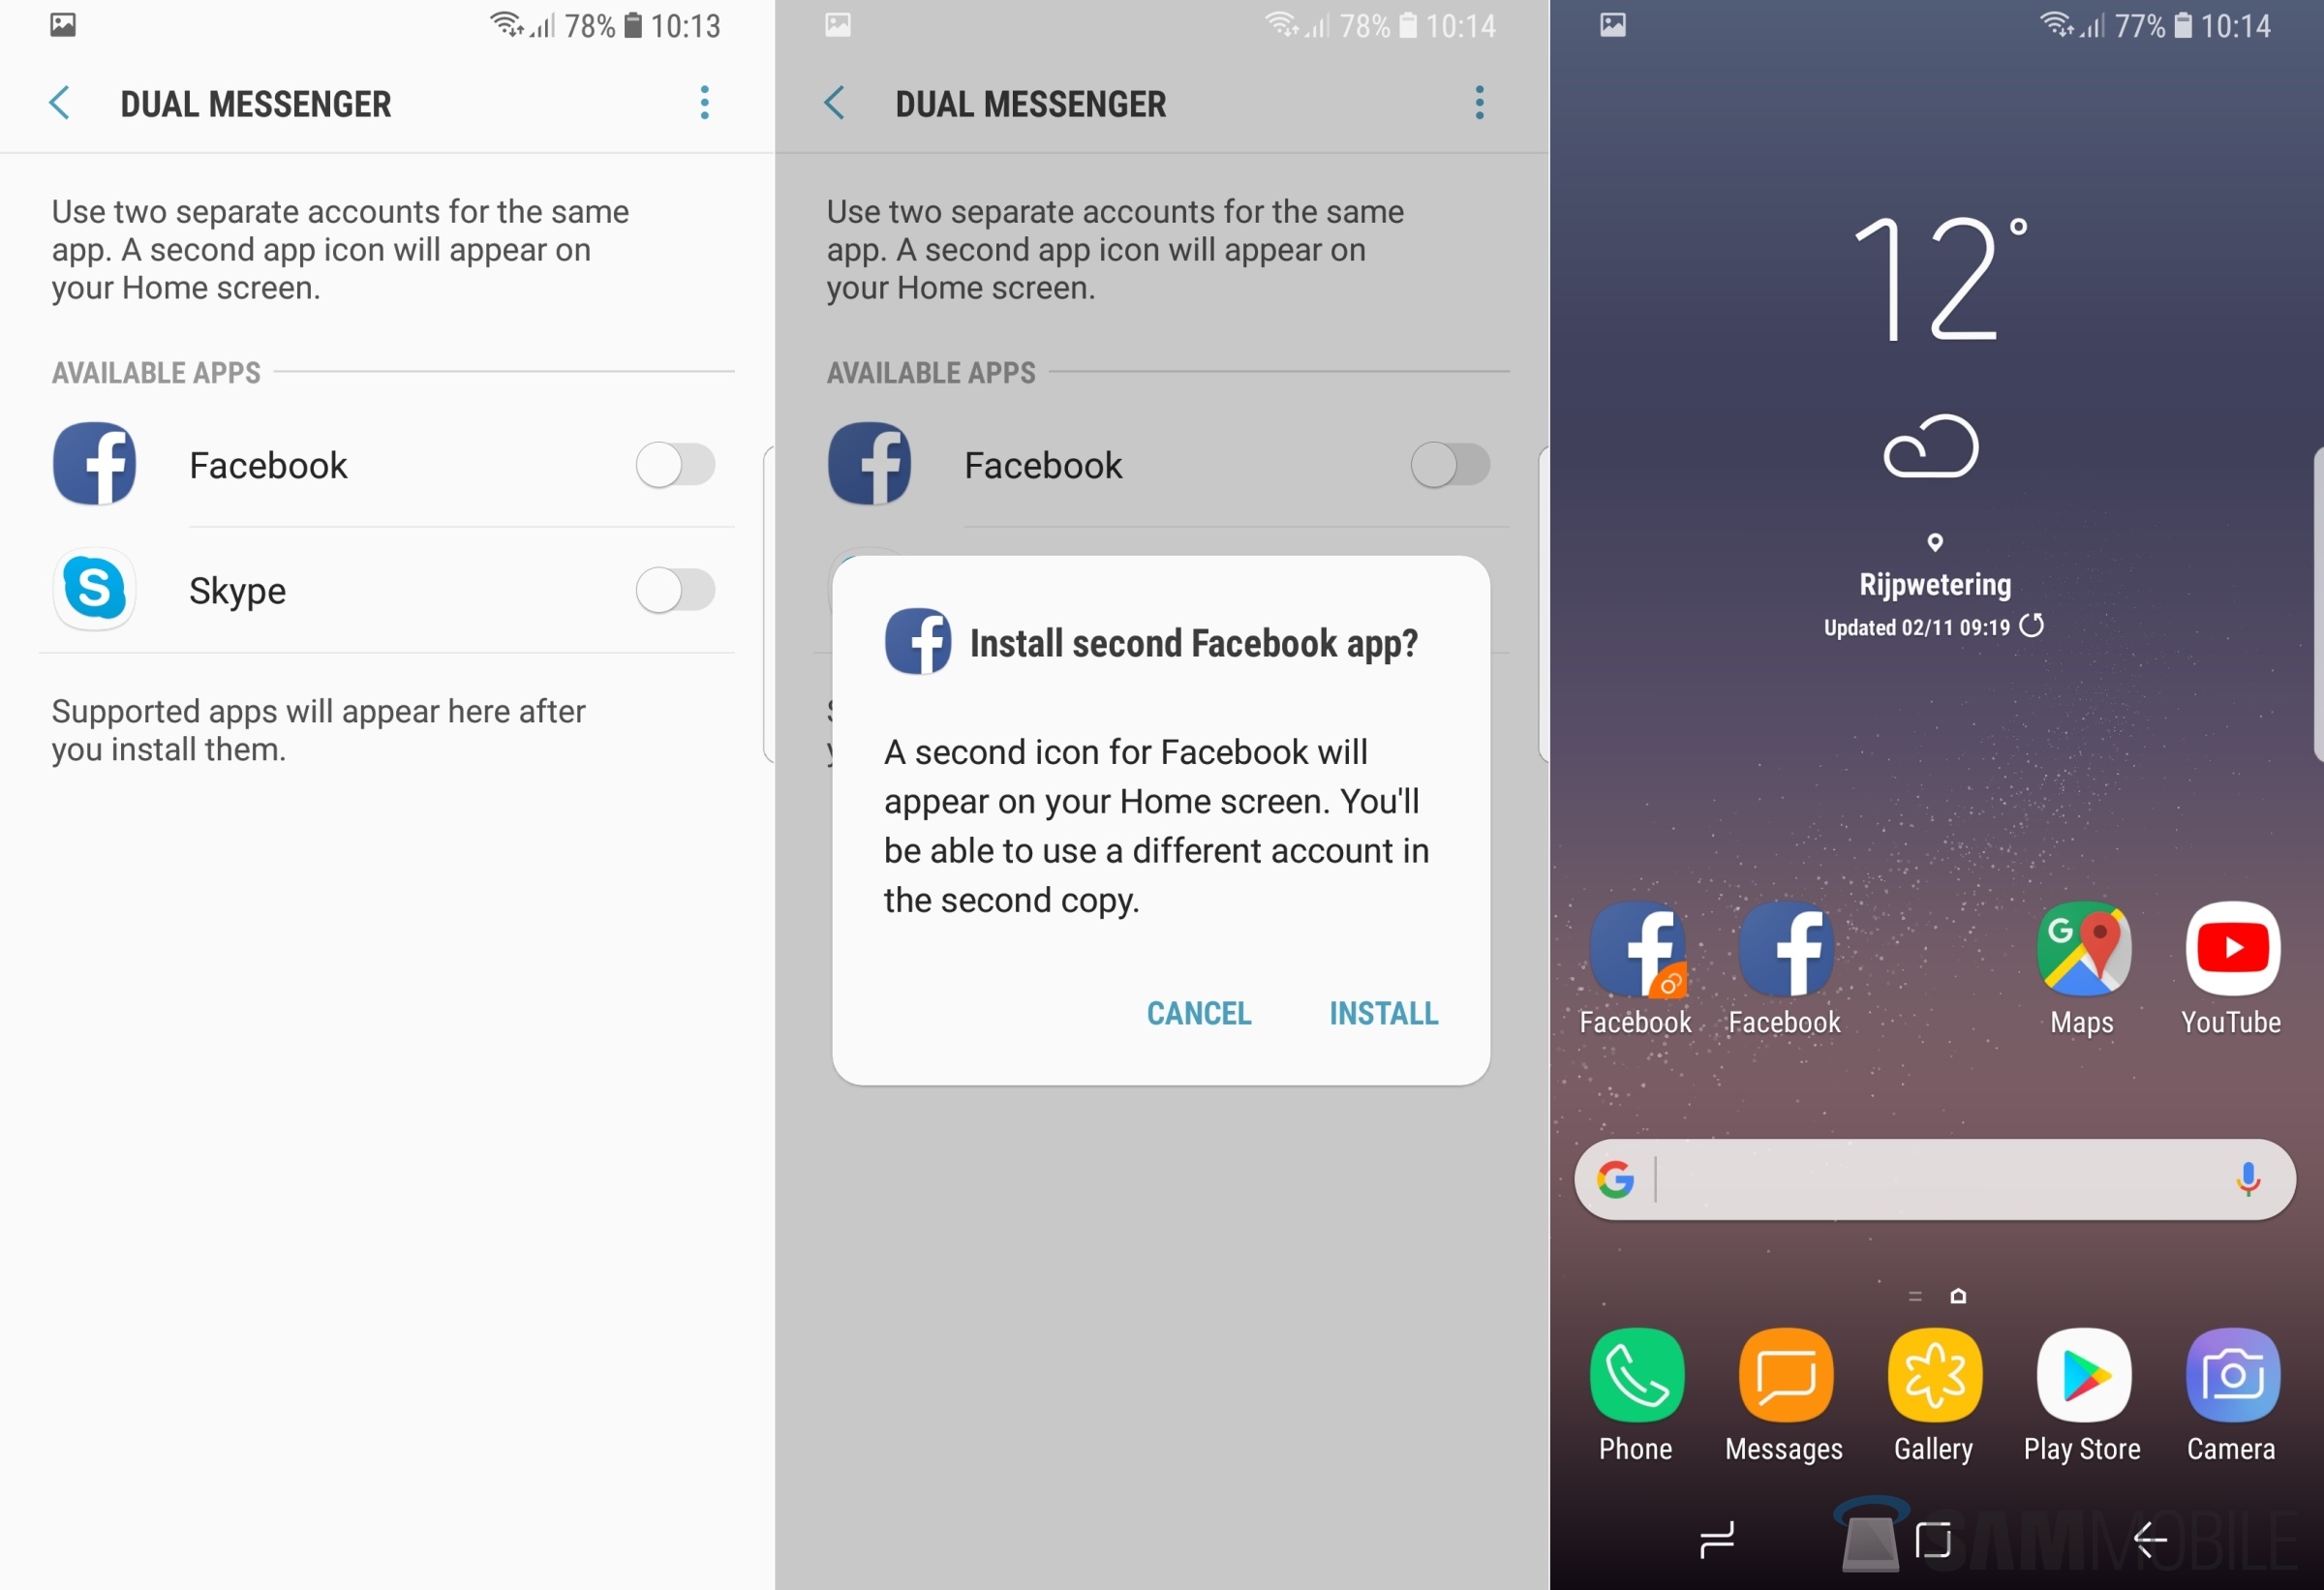 What’s New With Android 8.0 Oreo Part 4: Dual Messenger is now a standard feature